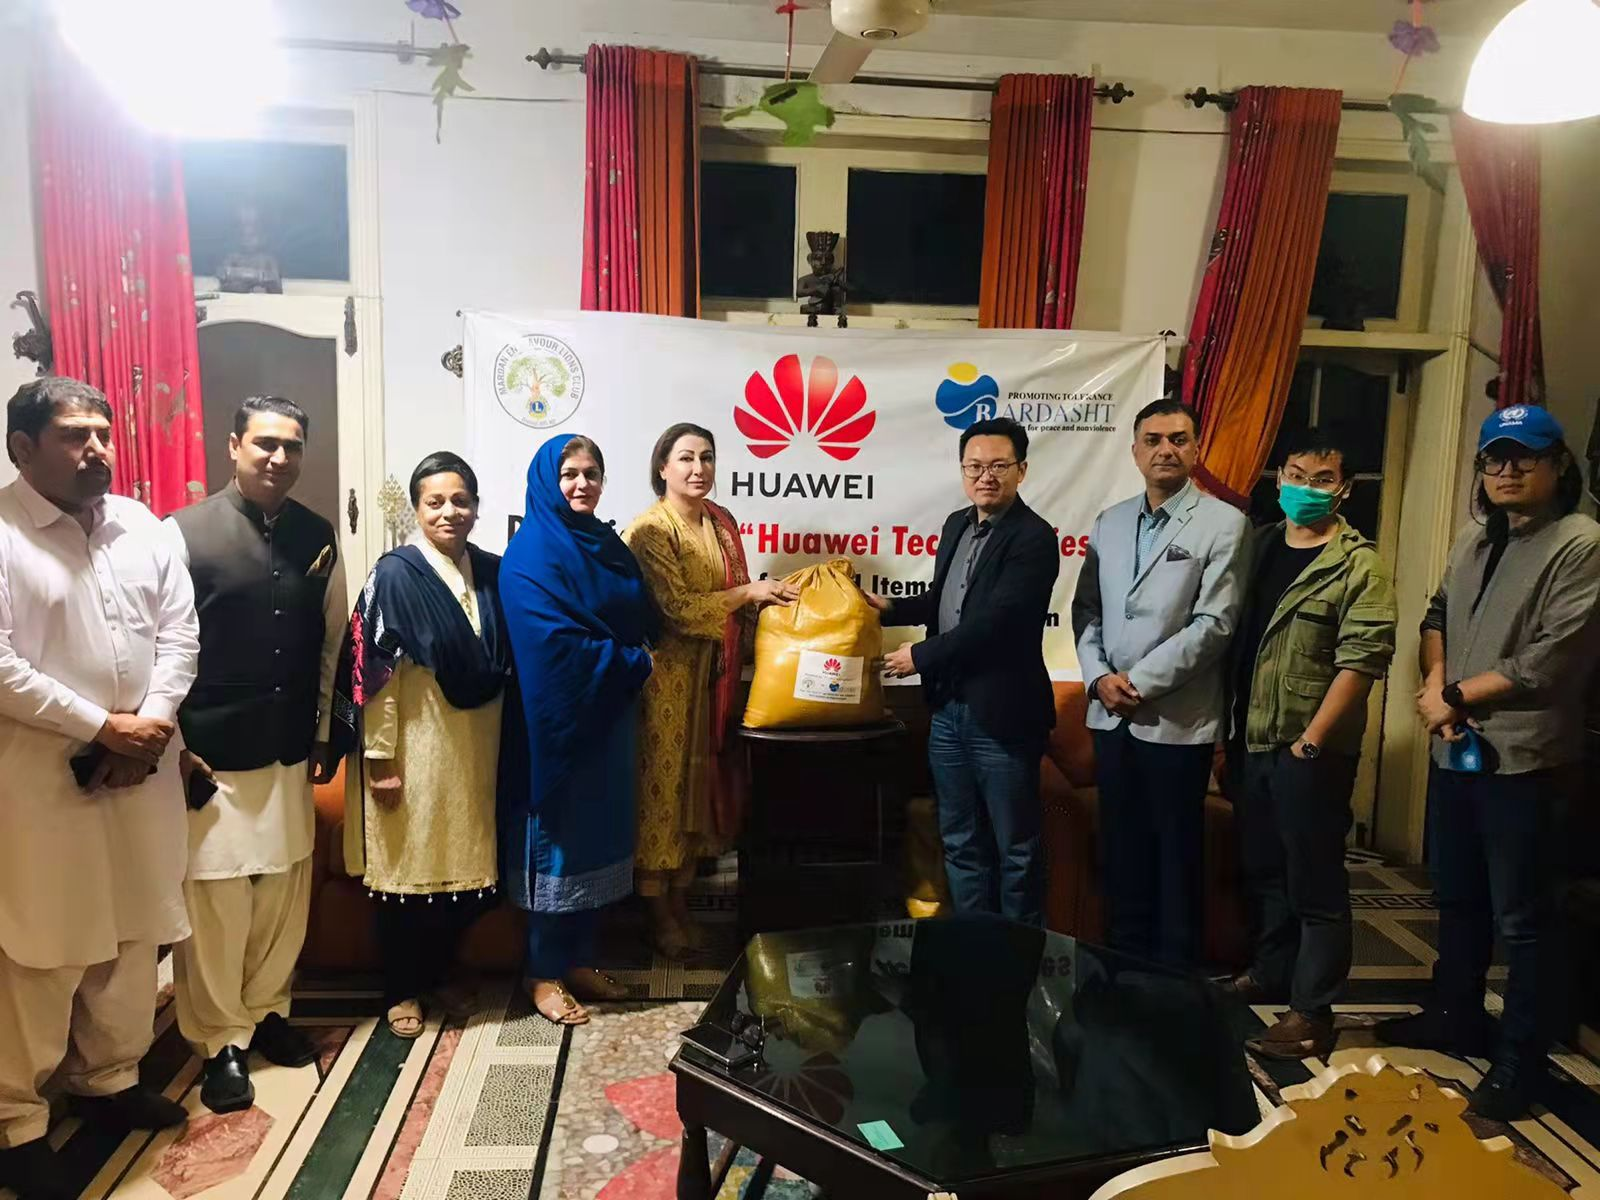 Huawei and Bardasht collaborate to aid Afghanistan’s children and women